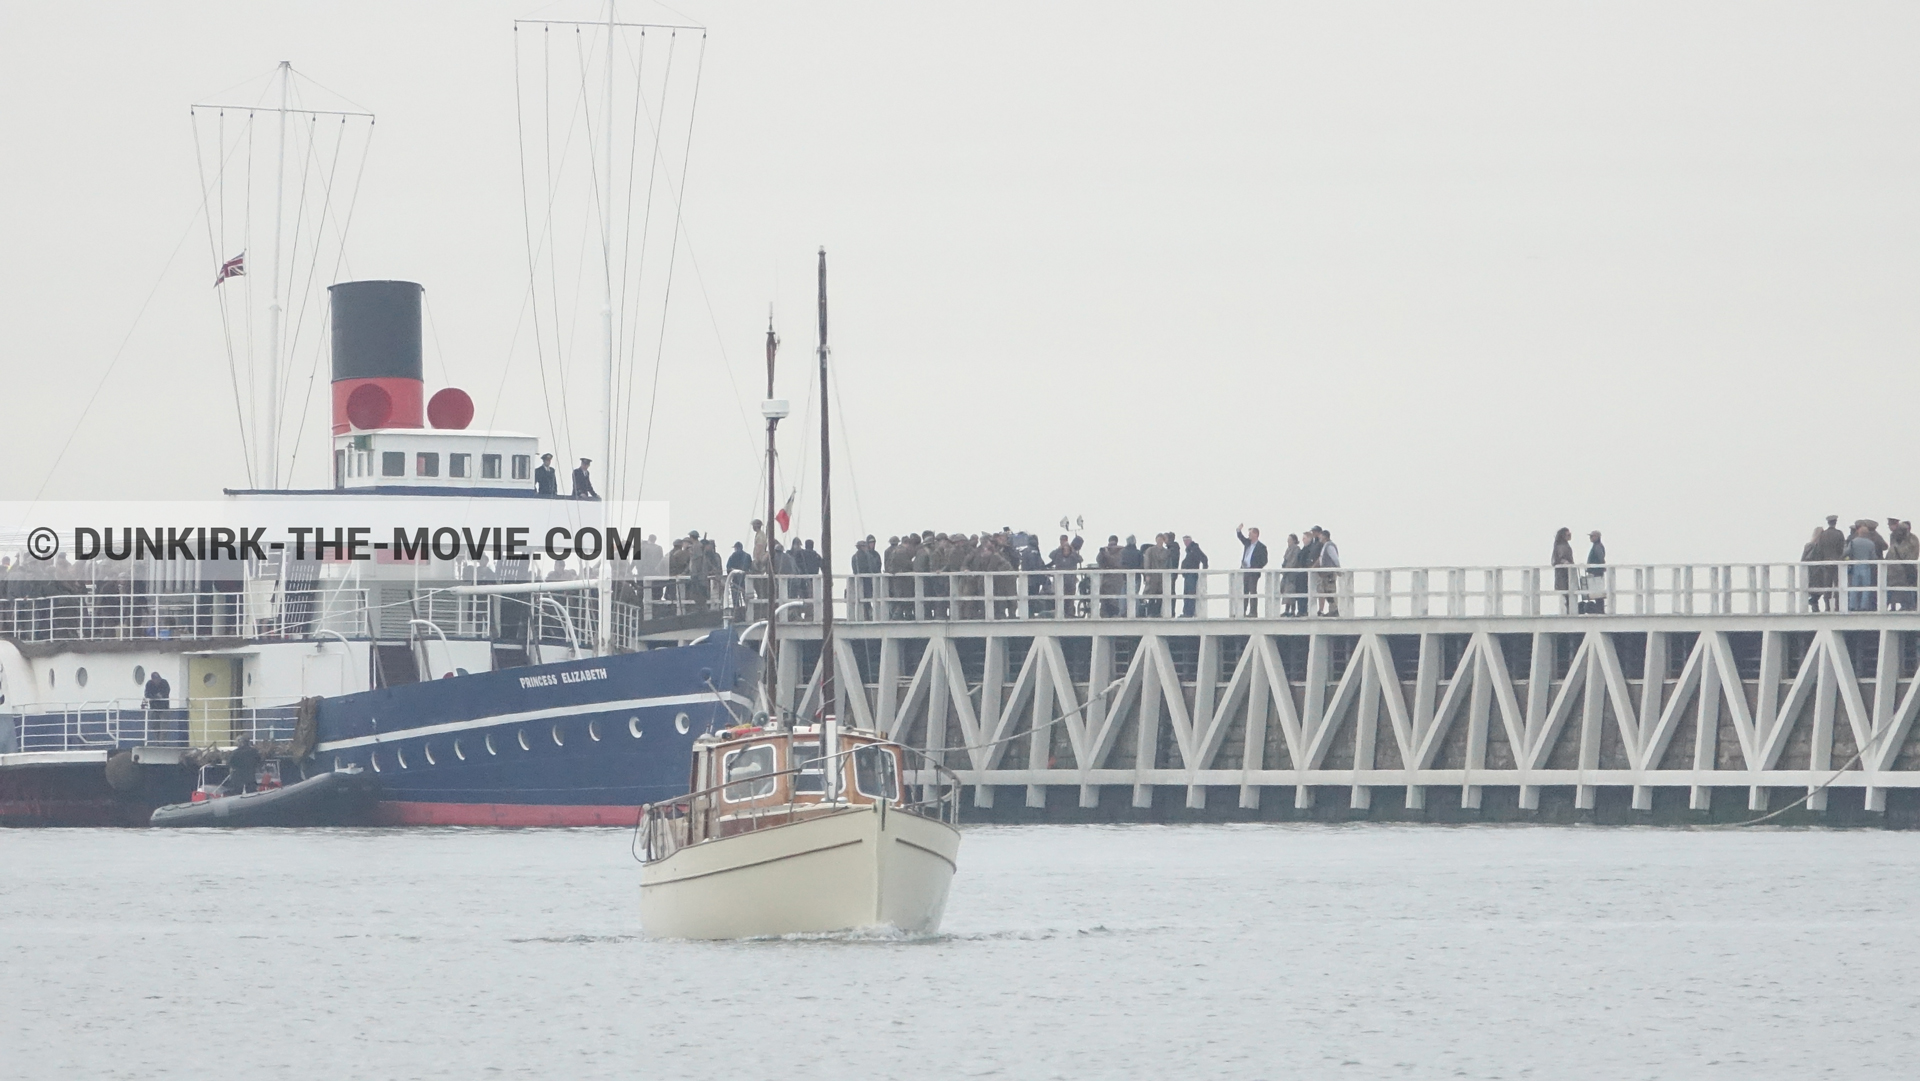 Picture with boat, supernumeraries, EST pier, Princess Elizabeth,  from behind the scene of the Dunkirk movie by Nolan